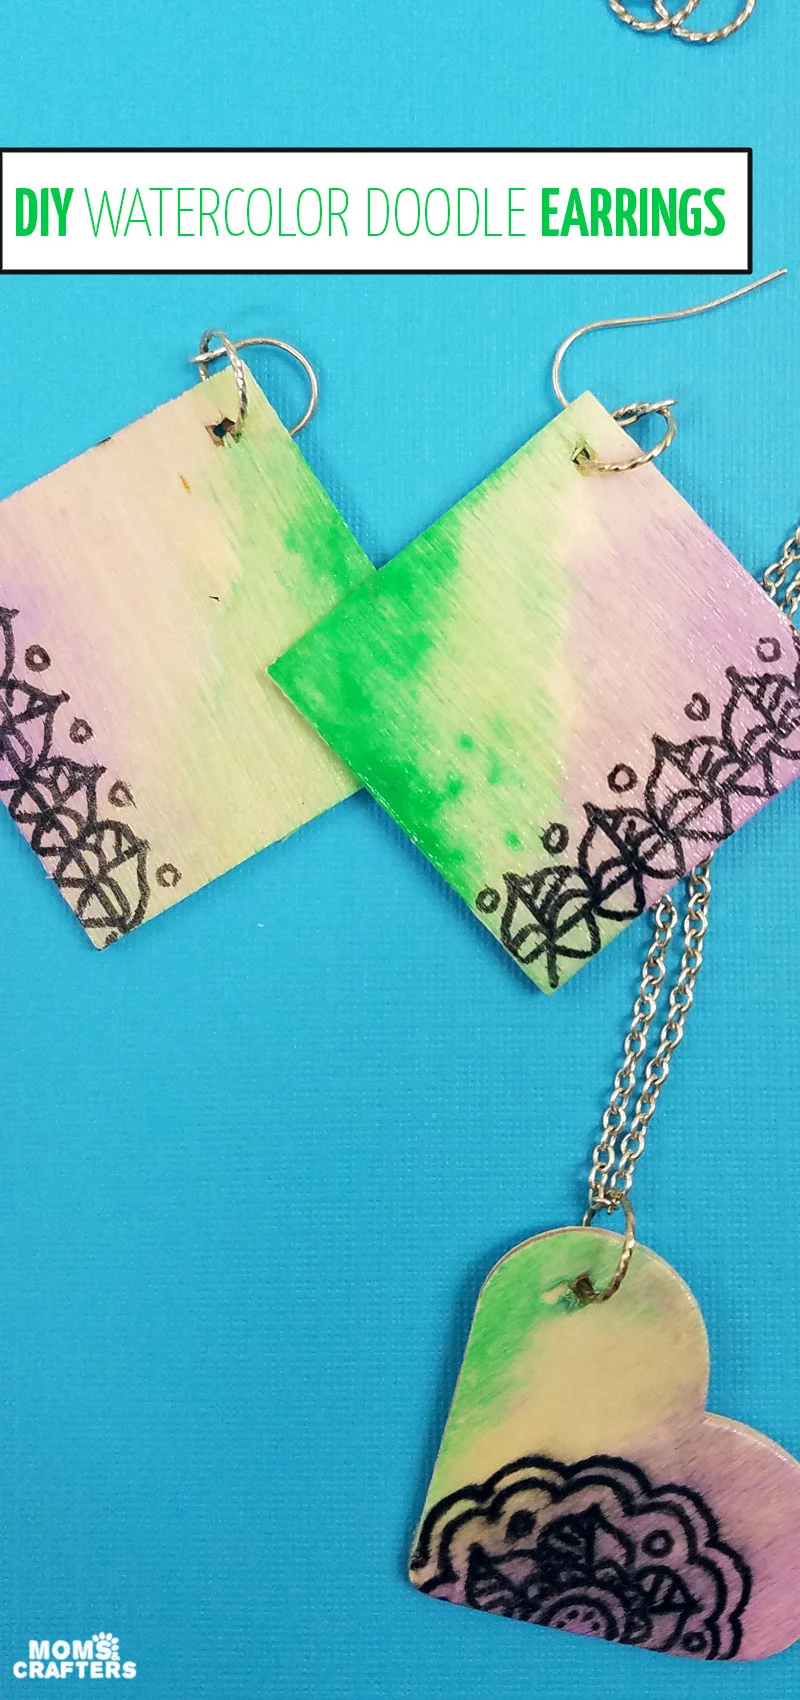 Click to learn how to make these watercolor doodle earrings - a fun and easy jewelry making project for teens and tweens, and great for beginners too!